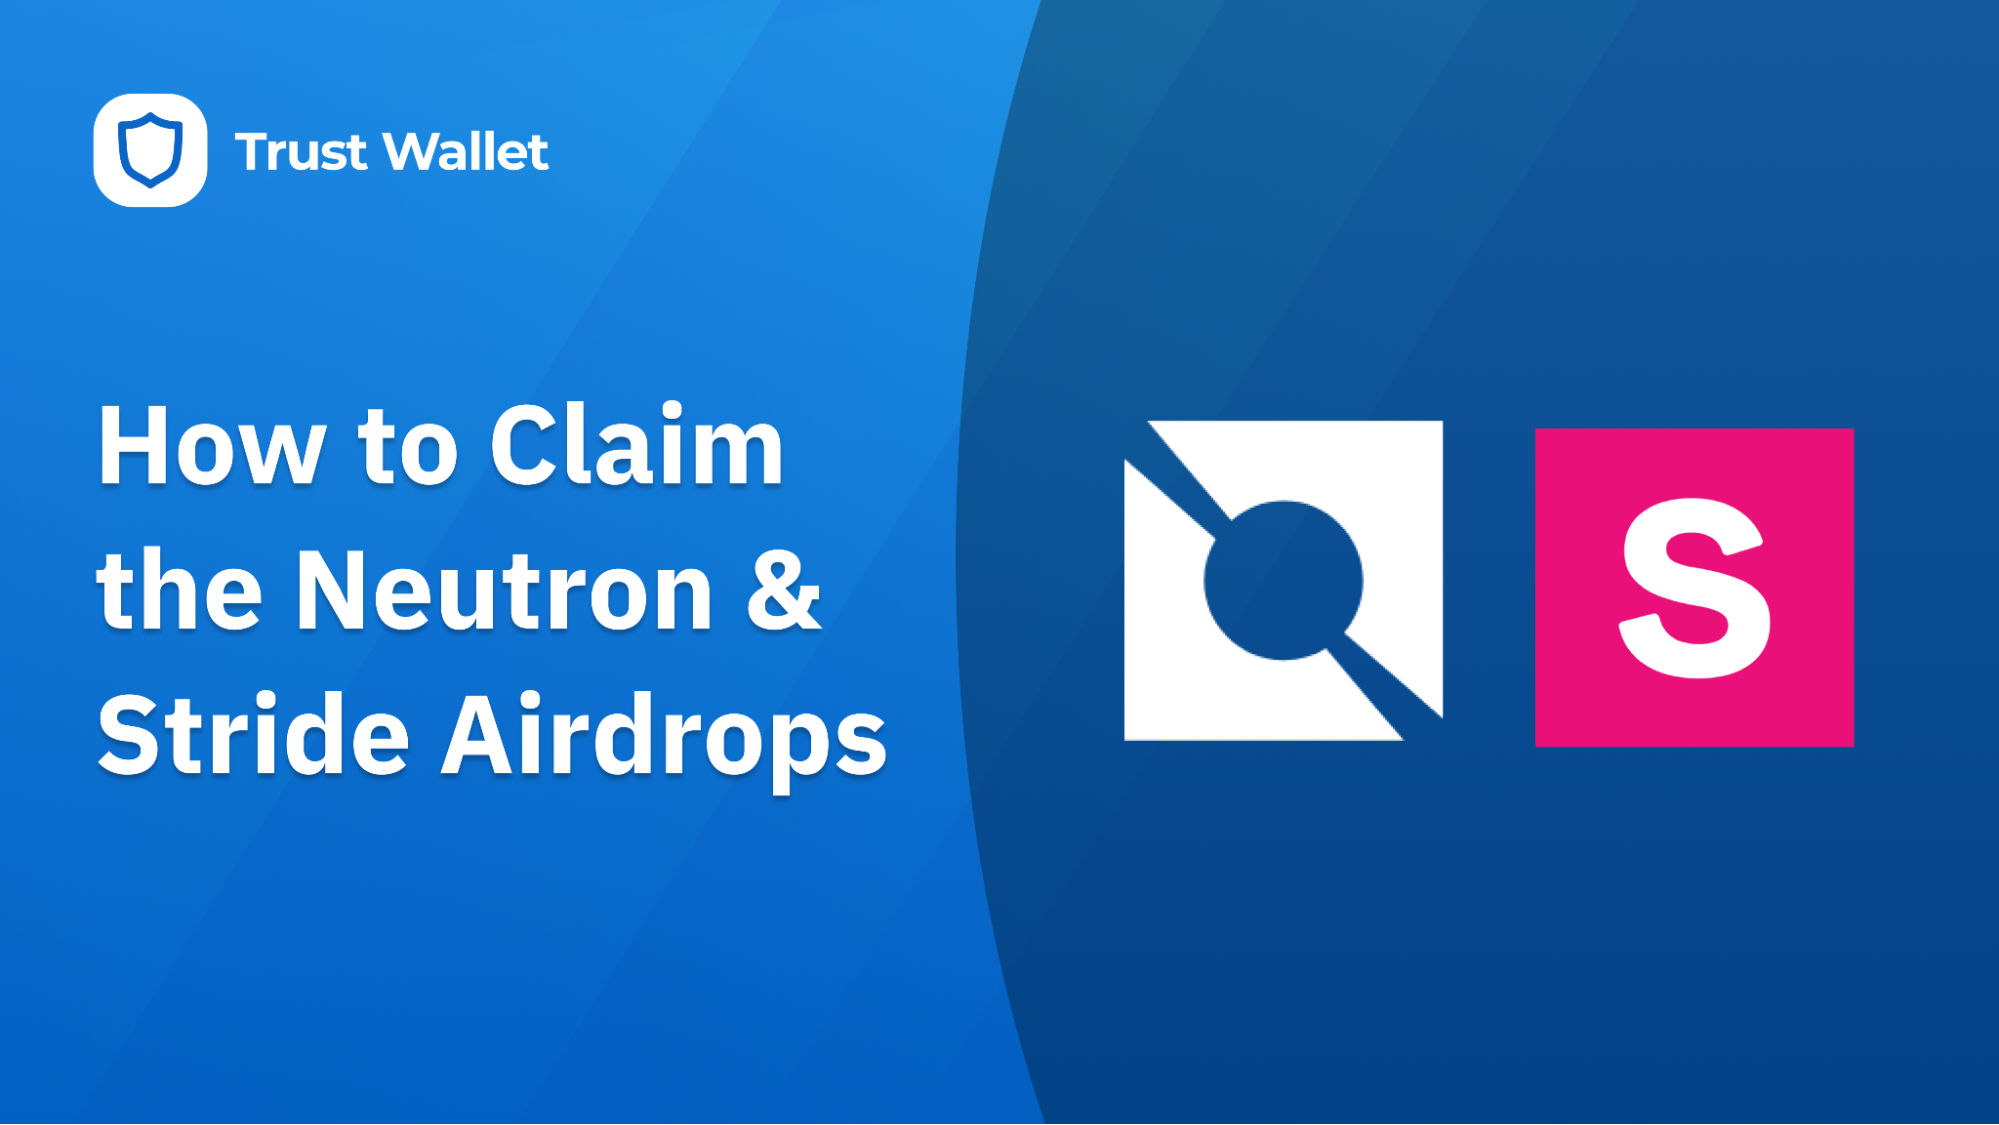 How to Claim the Neutron & Stride Airdrops